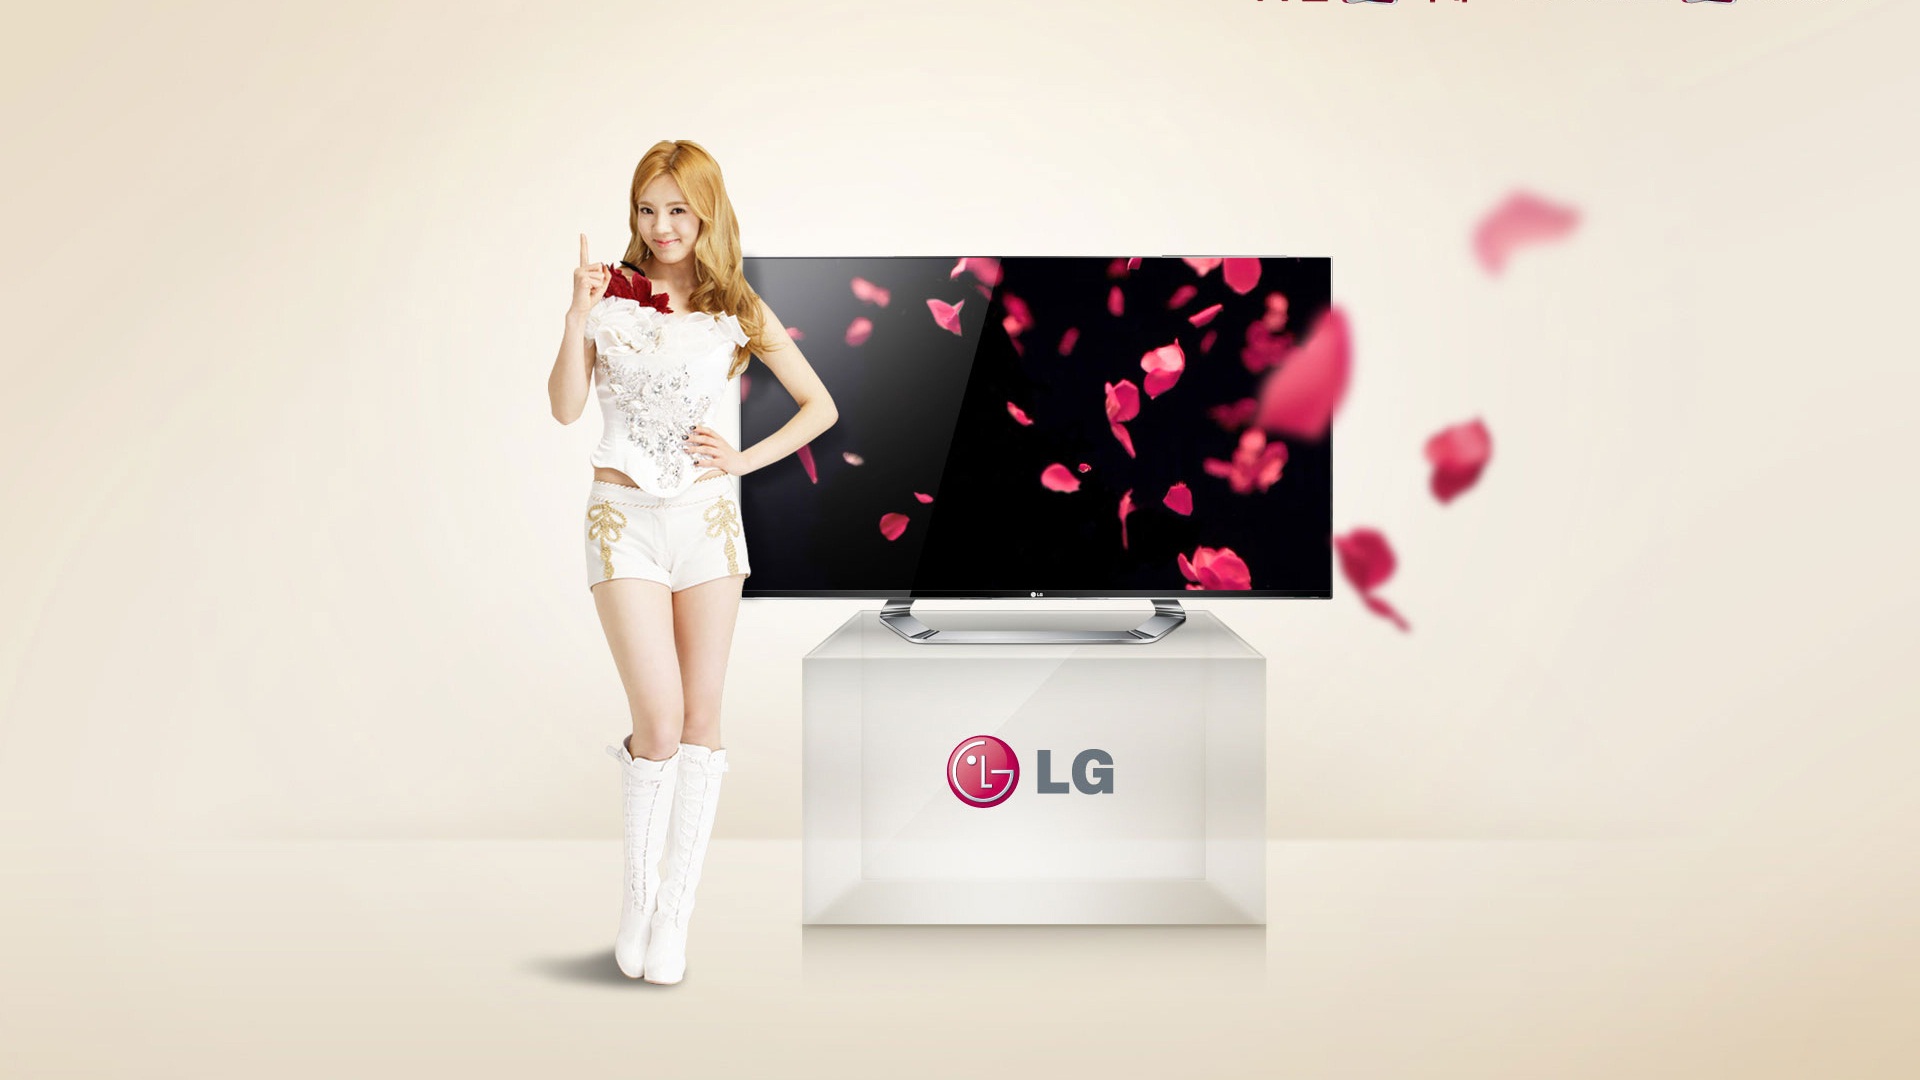 Girls Generation ACE and LG endorsements ads HD wallpapers #13 - 1920x1080